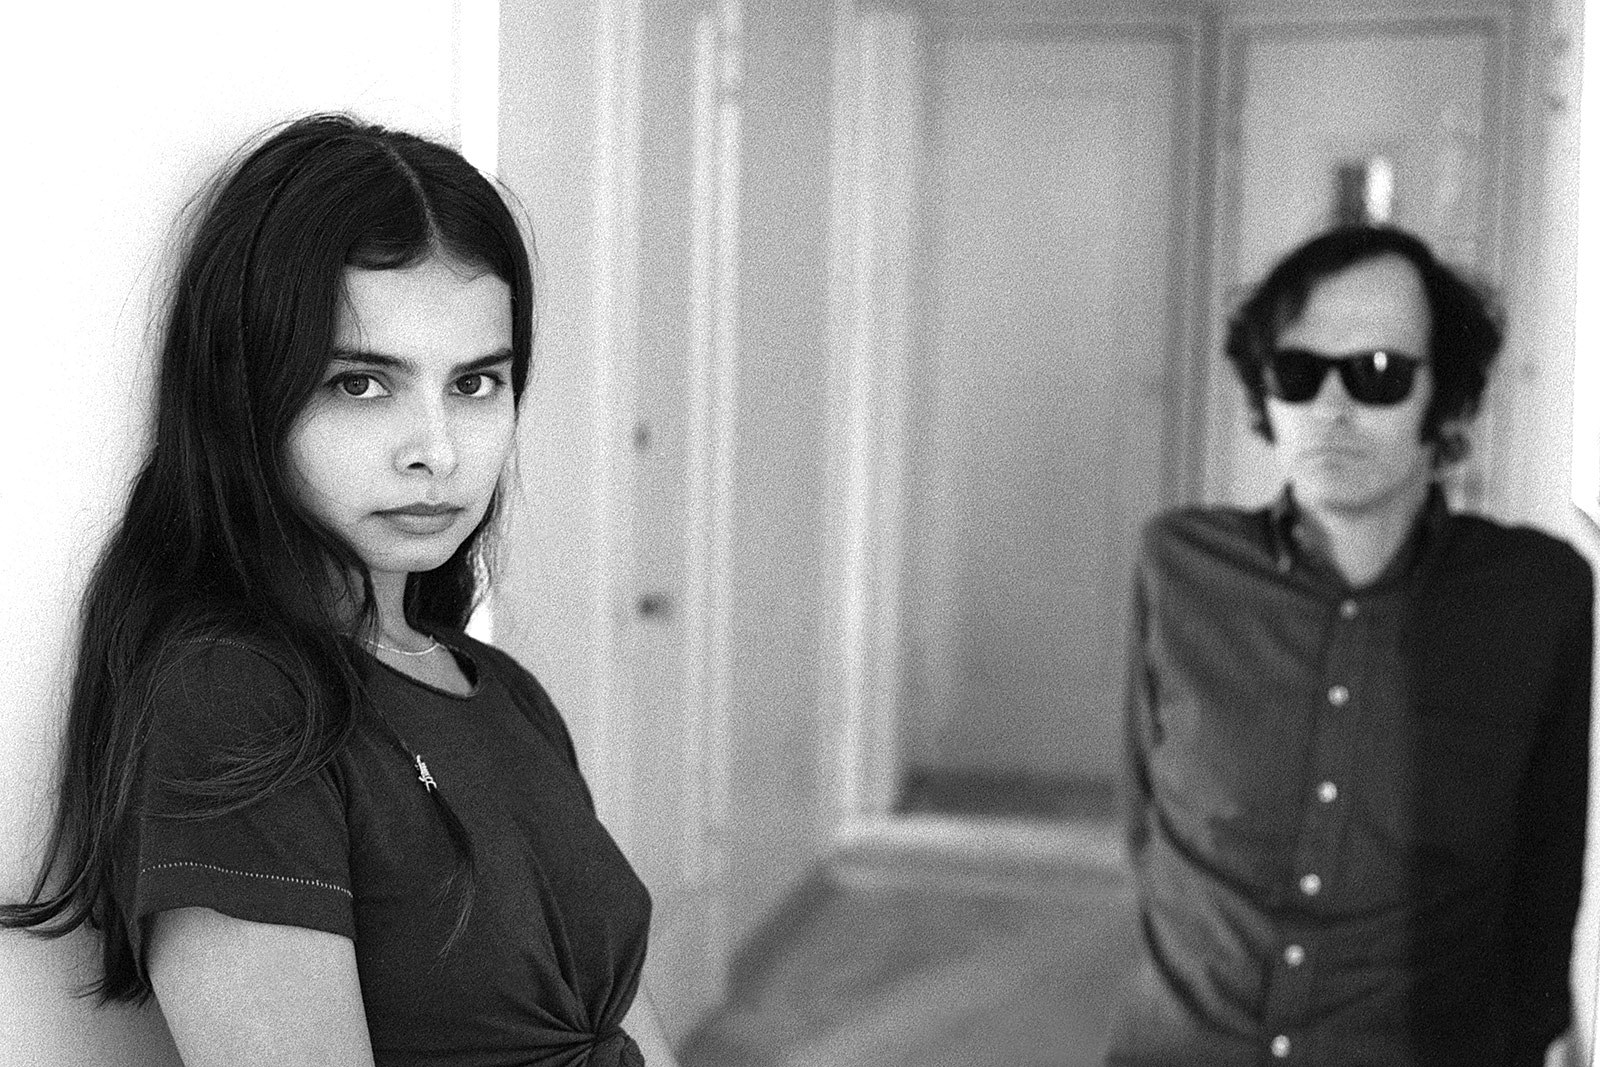 "Halah" by Mazzy Star - Song of the Day